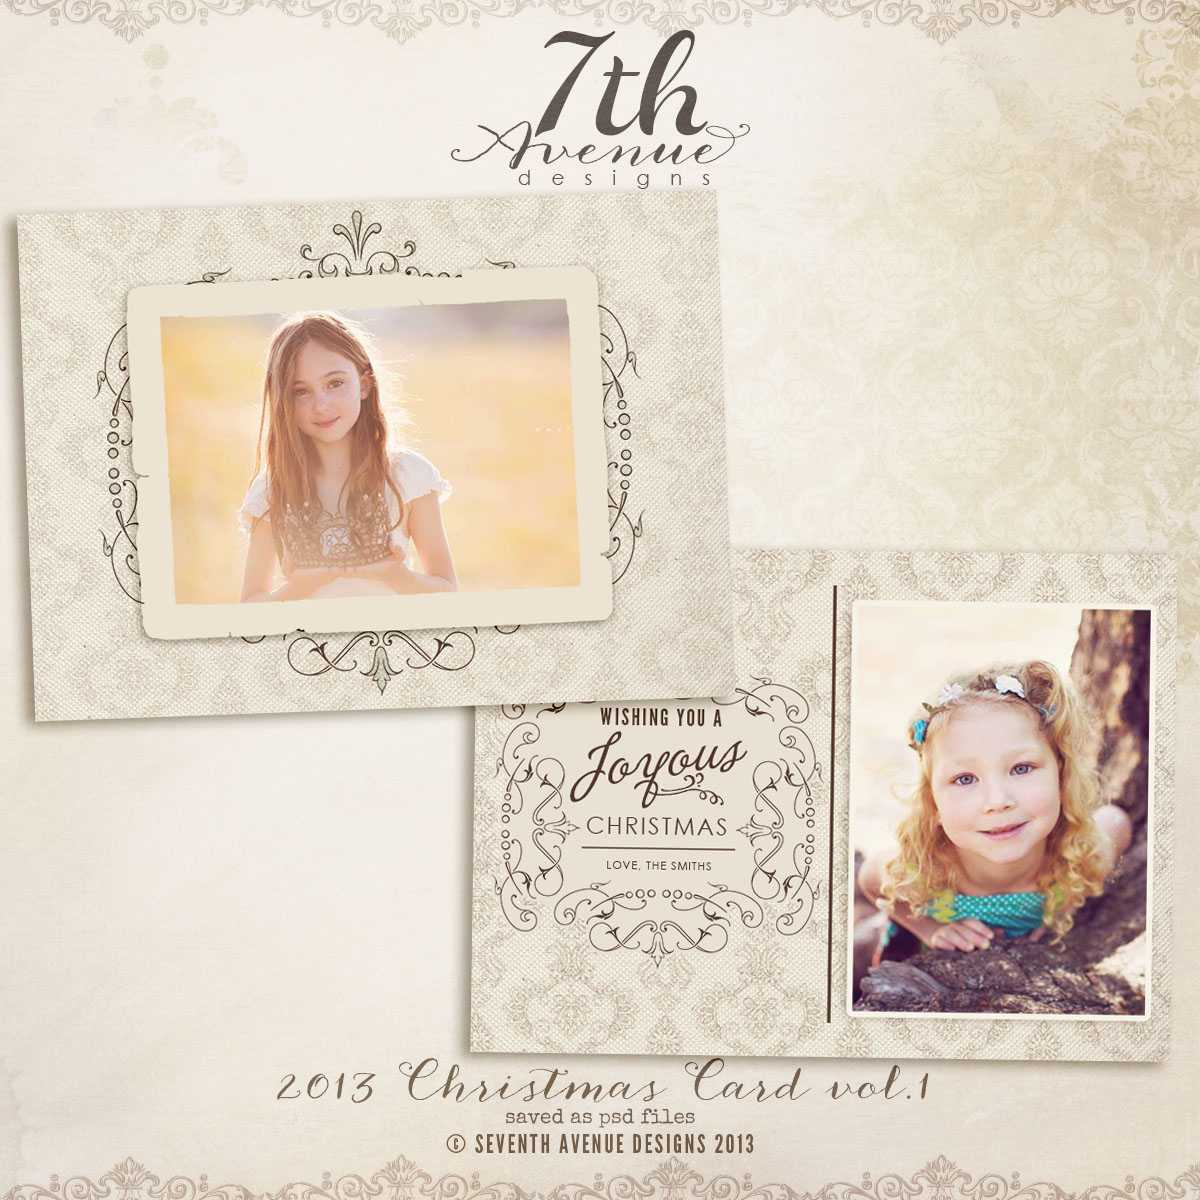 All Products : 7Thavenue Designs :: Logo And Templates With Regard To Free Photoshop Christmas Card Templates For Photographers